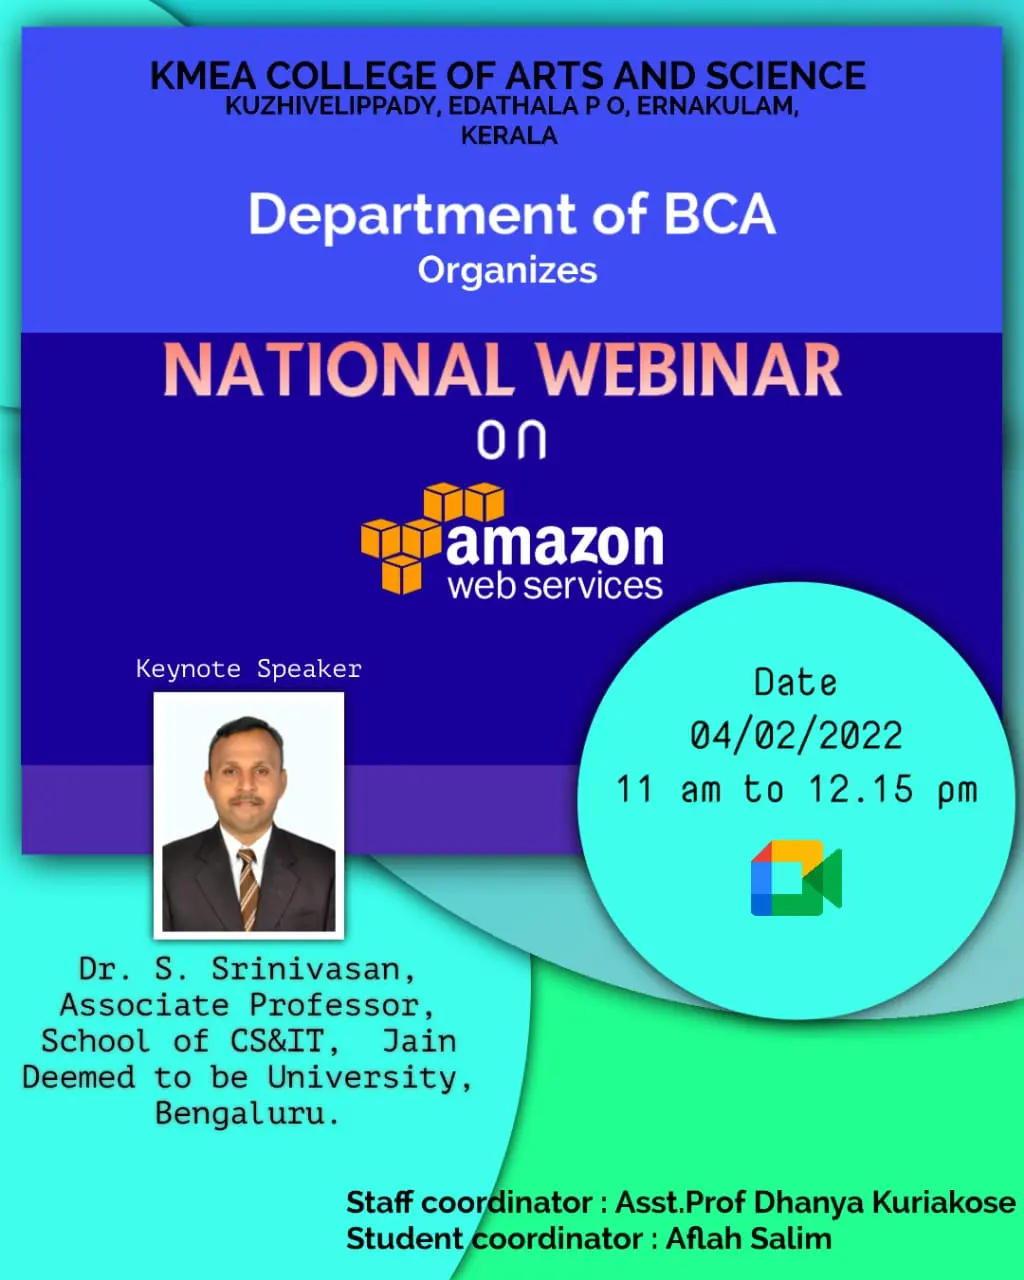 Department of BCA organized "National Webinar on amazon web services" on 04/02/2022.